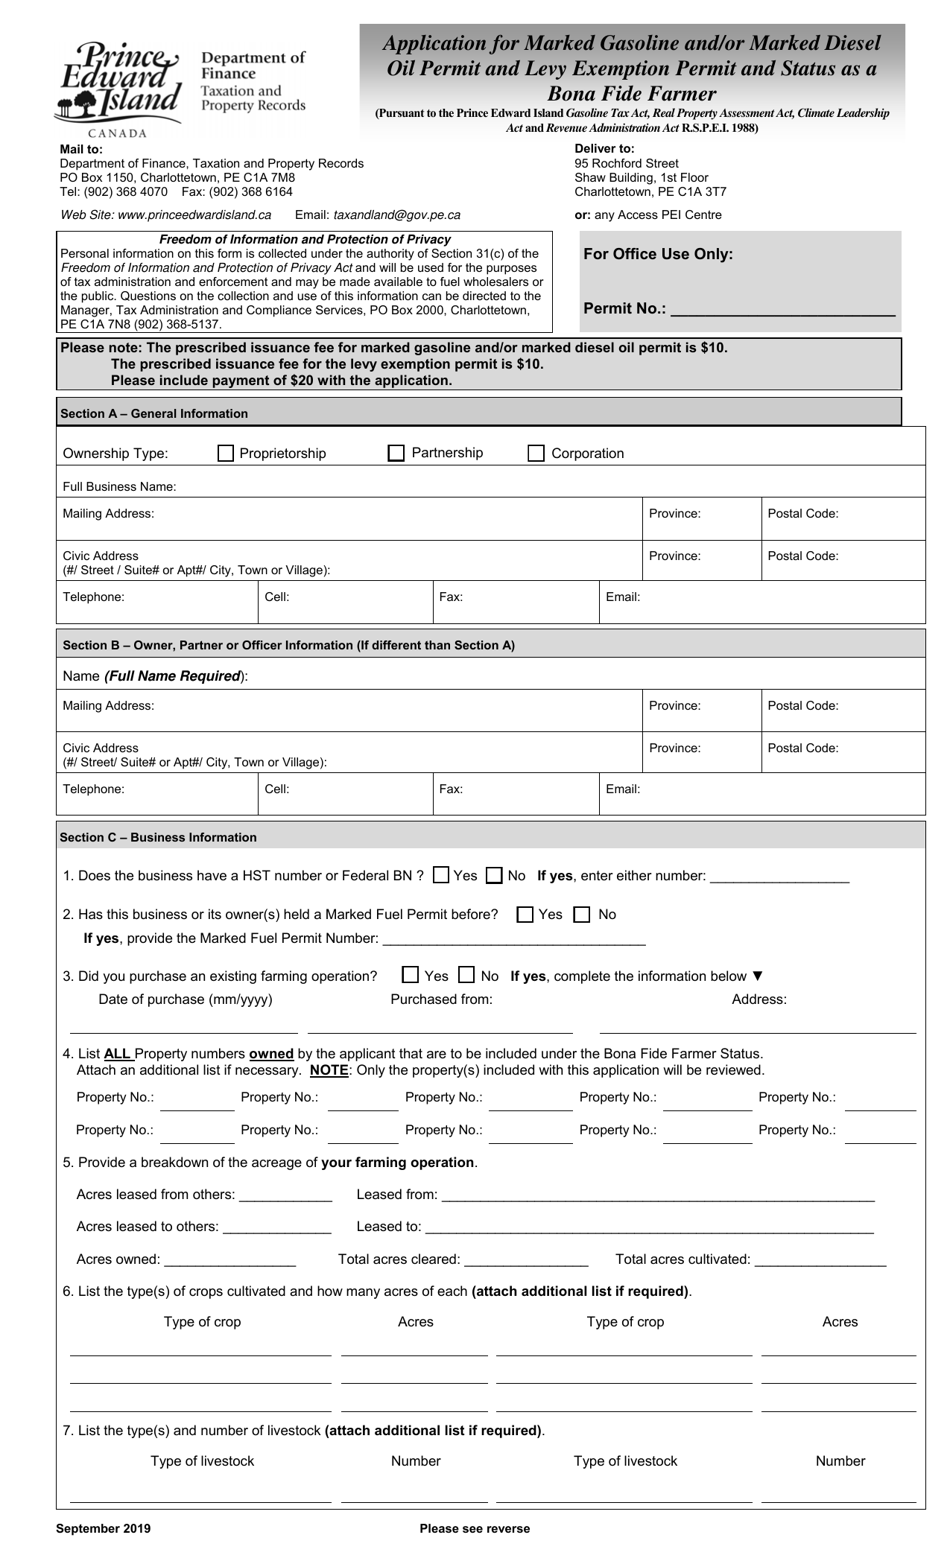 Application for Marked Gasoline and / or Marked Diesel Oil Permit and Levy Exemption Permit and Status as a Bona Fide Farmer - Prince Edward Island, Canada, Page 1